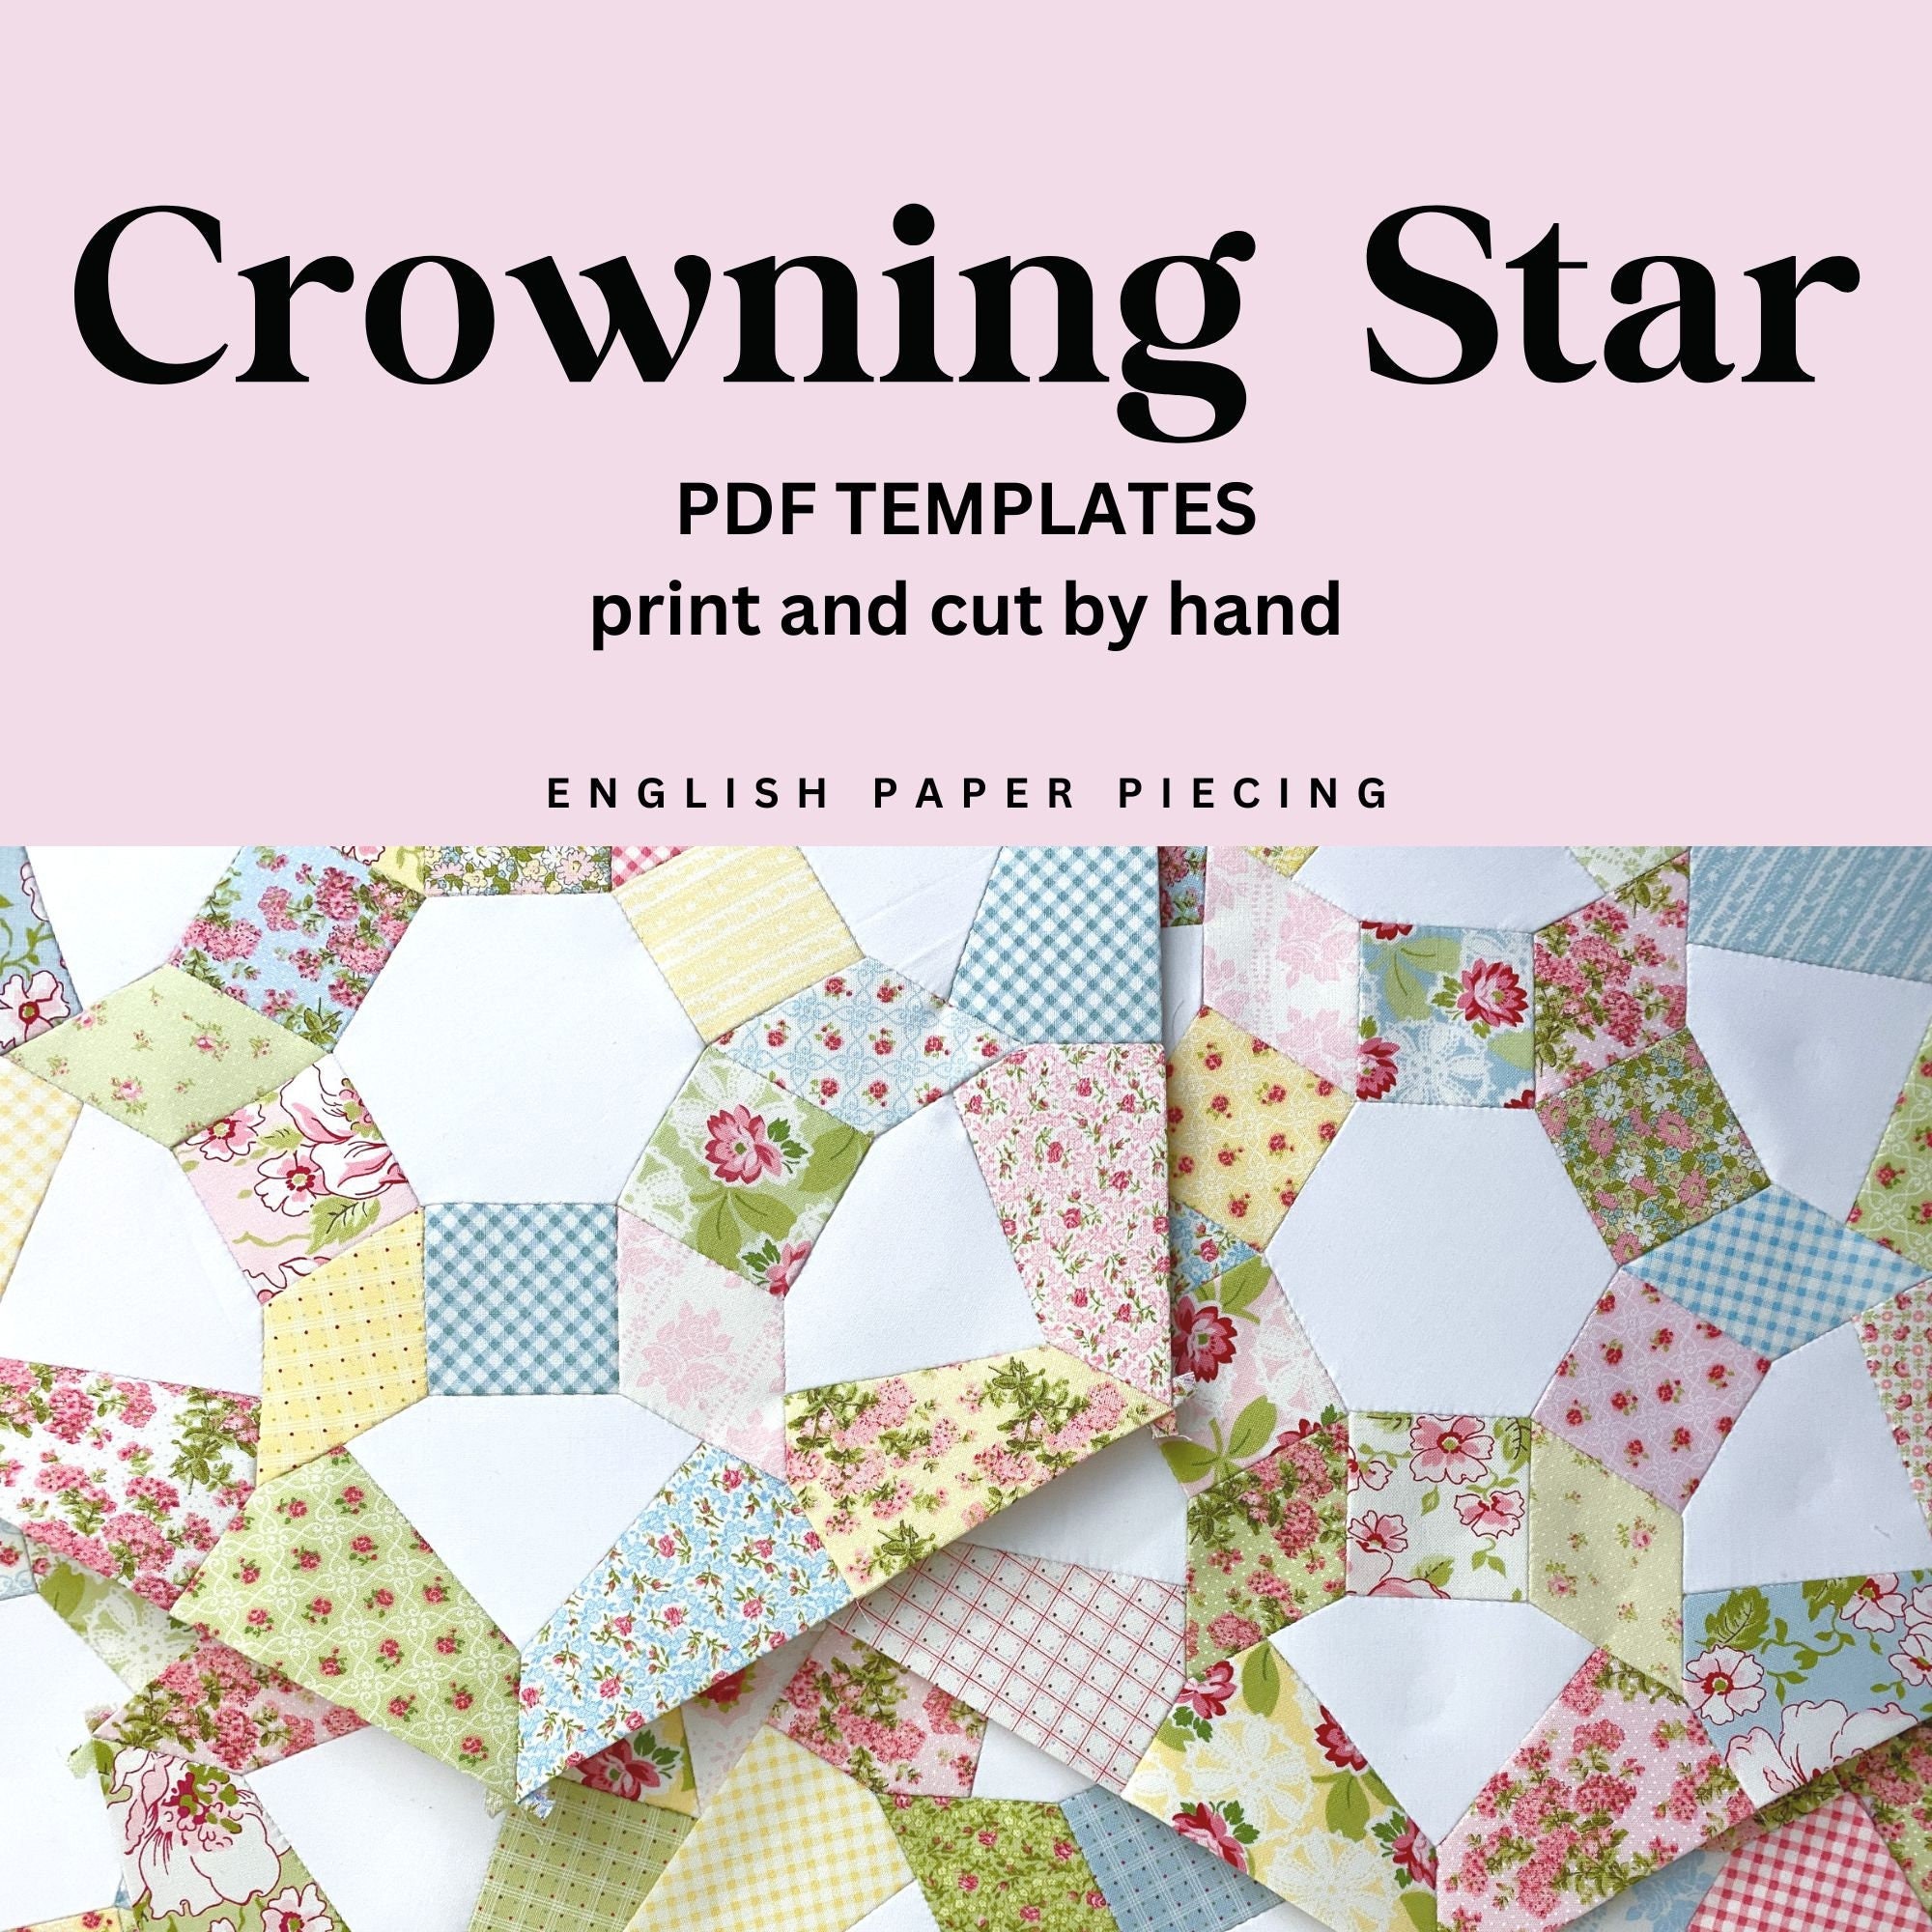 Crowning Star English Paper Piecing Quilt PDF Templates Print and